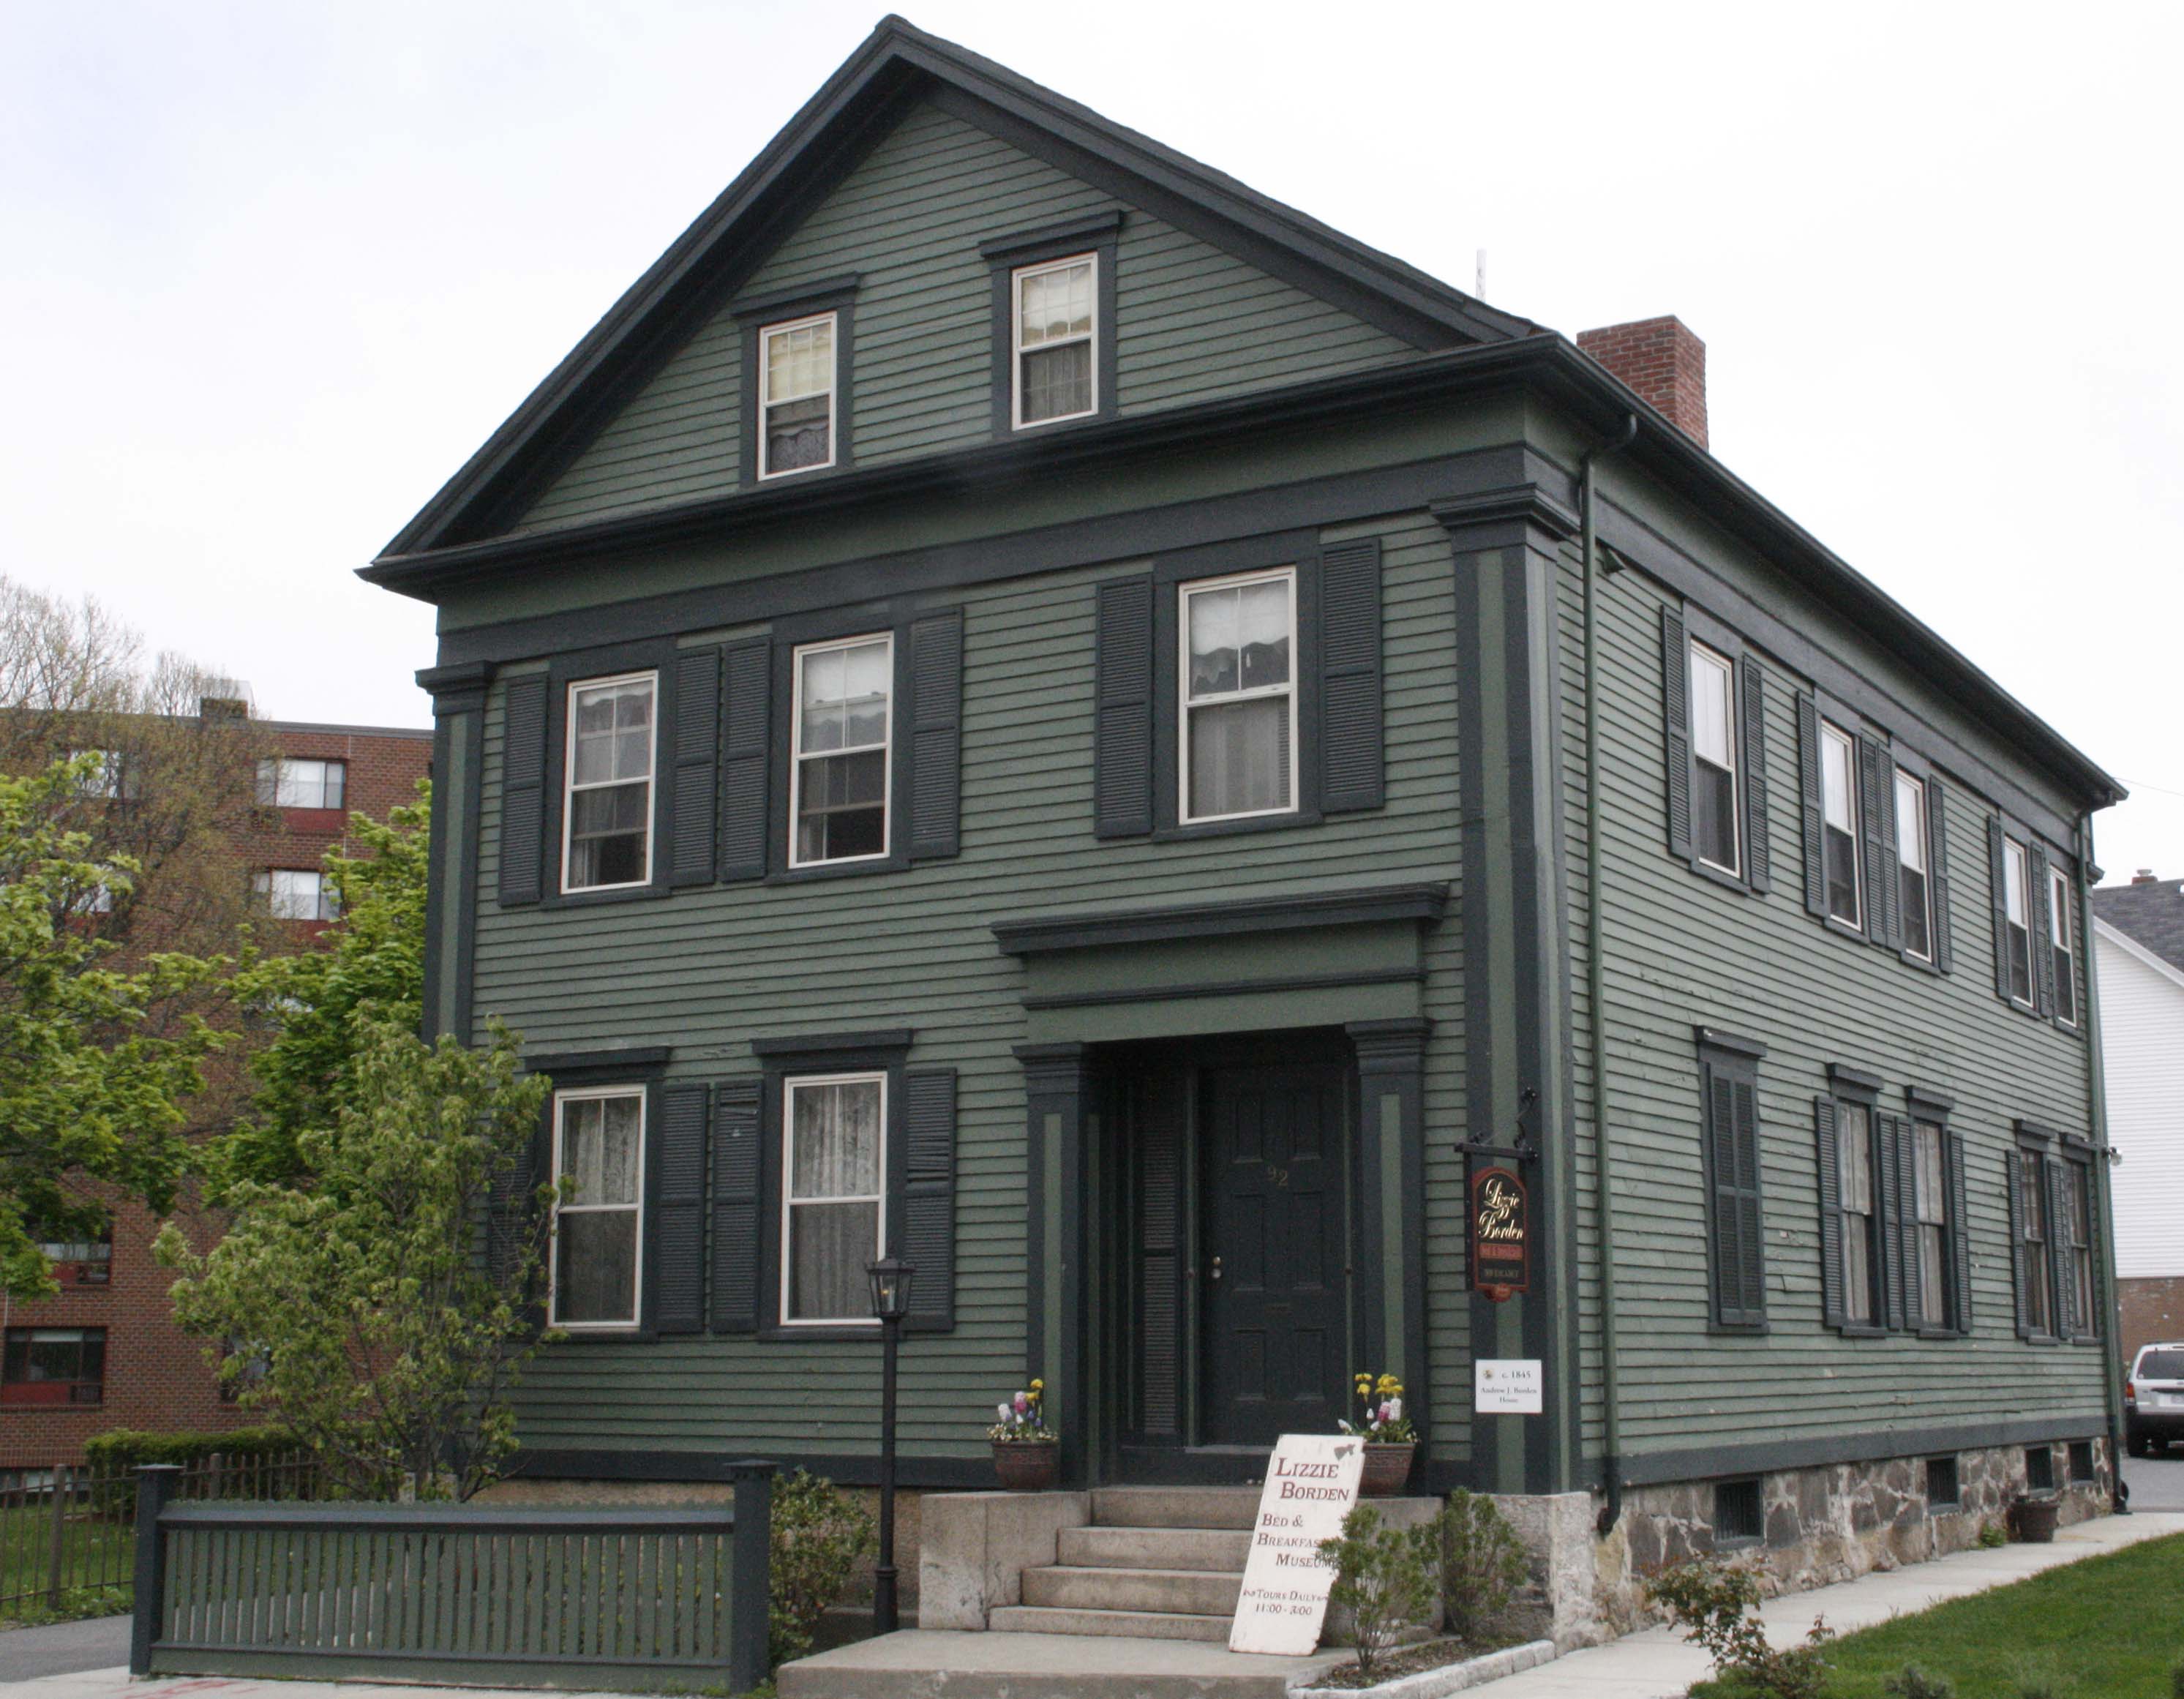 Lizzie Borden Bed and Breakfast paranormal